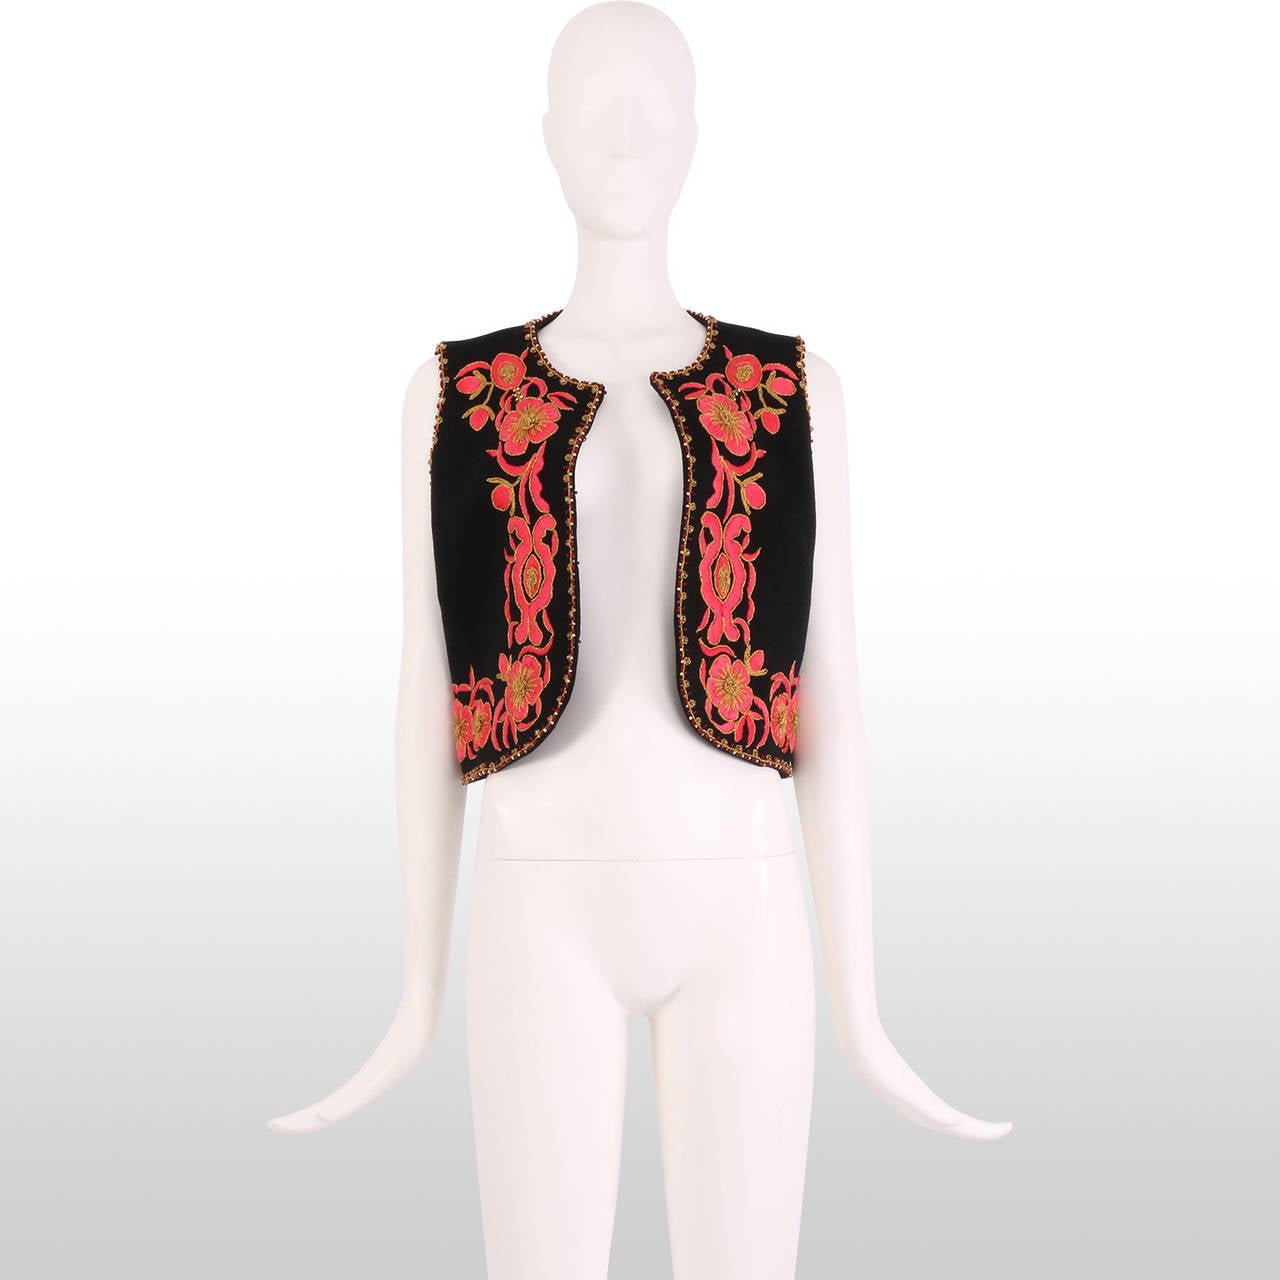 This gorgeous little 1960's folk vest is a great, unique and fresh addition to your summer outfit this year. It is beautifully made and hand embroidered with with hot pink florals with gold metallic detailing. The vest is also immaculately trimmed